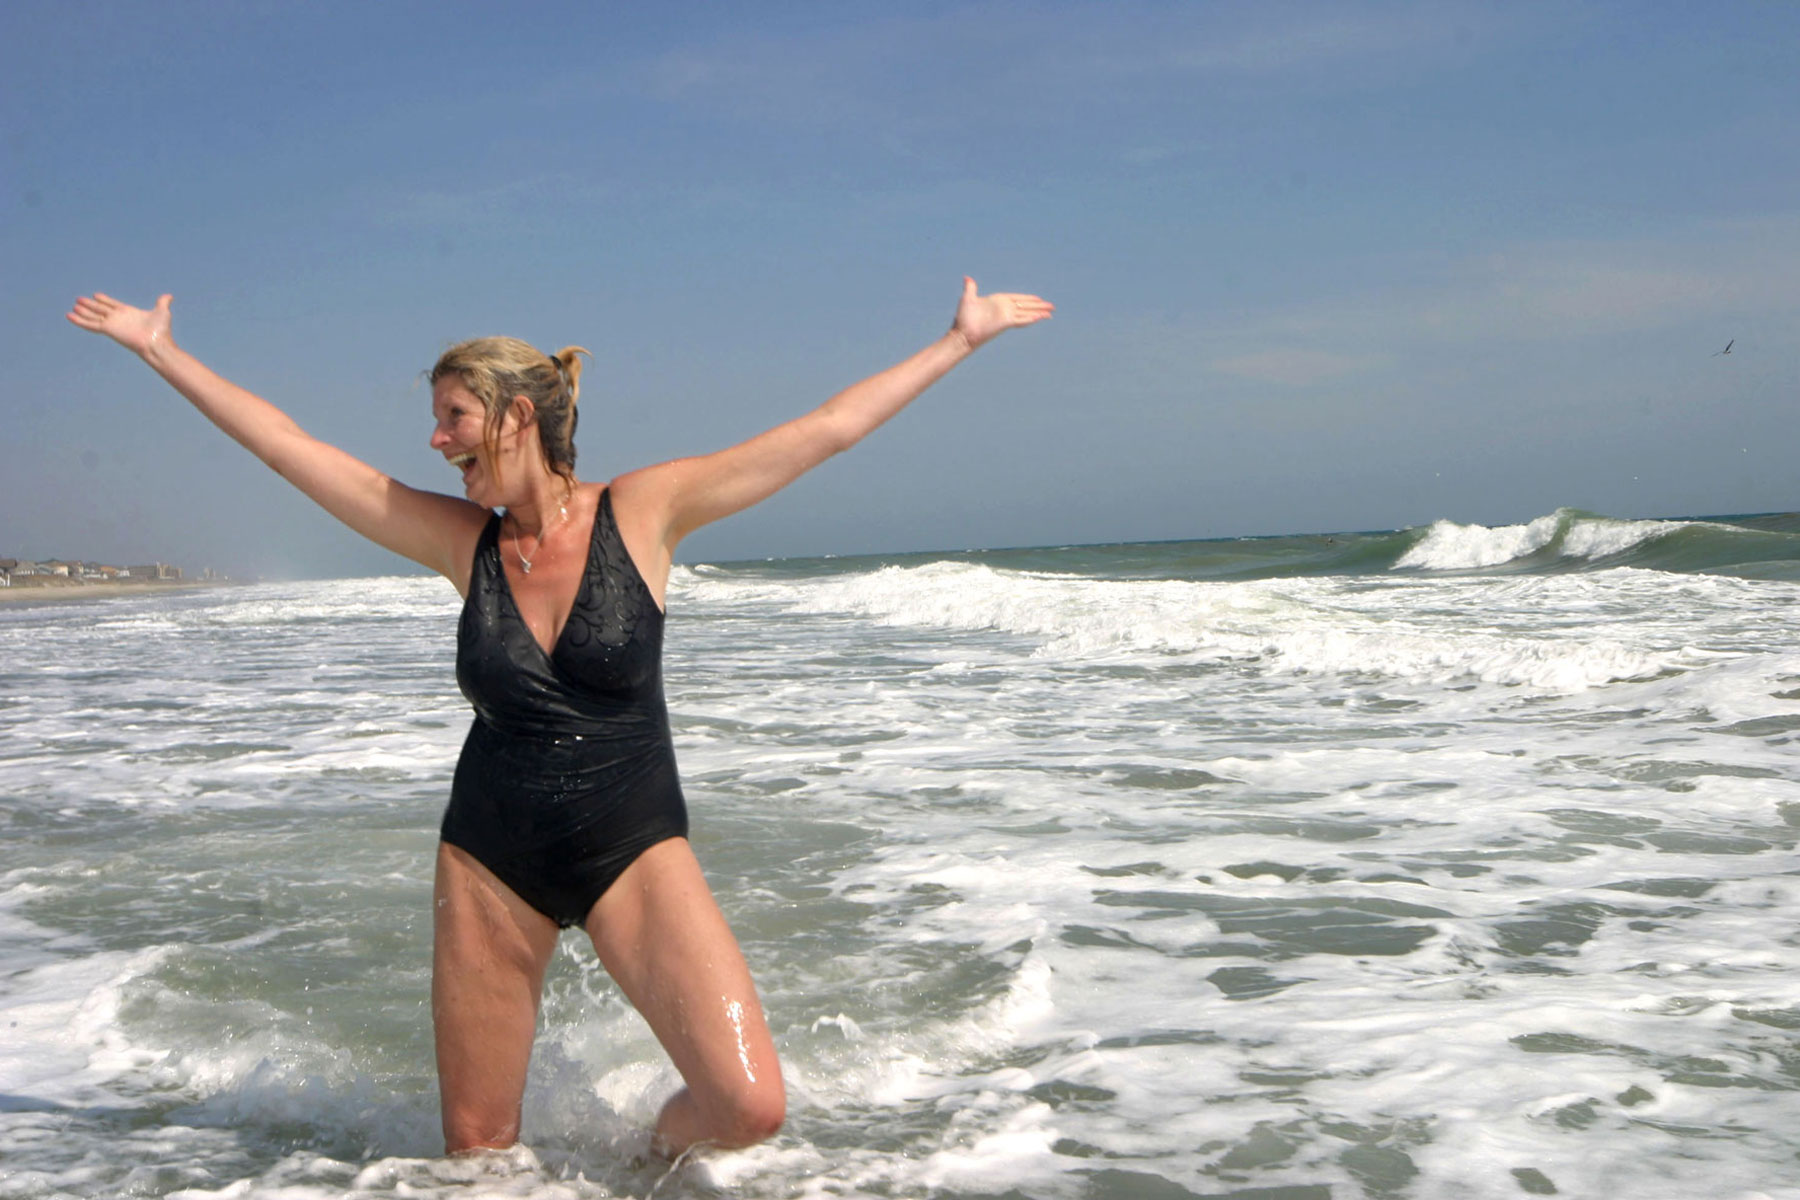 A woman in a black, one-piece bathing suit tosses her hands in the air while standing in shallow water